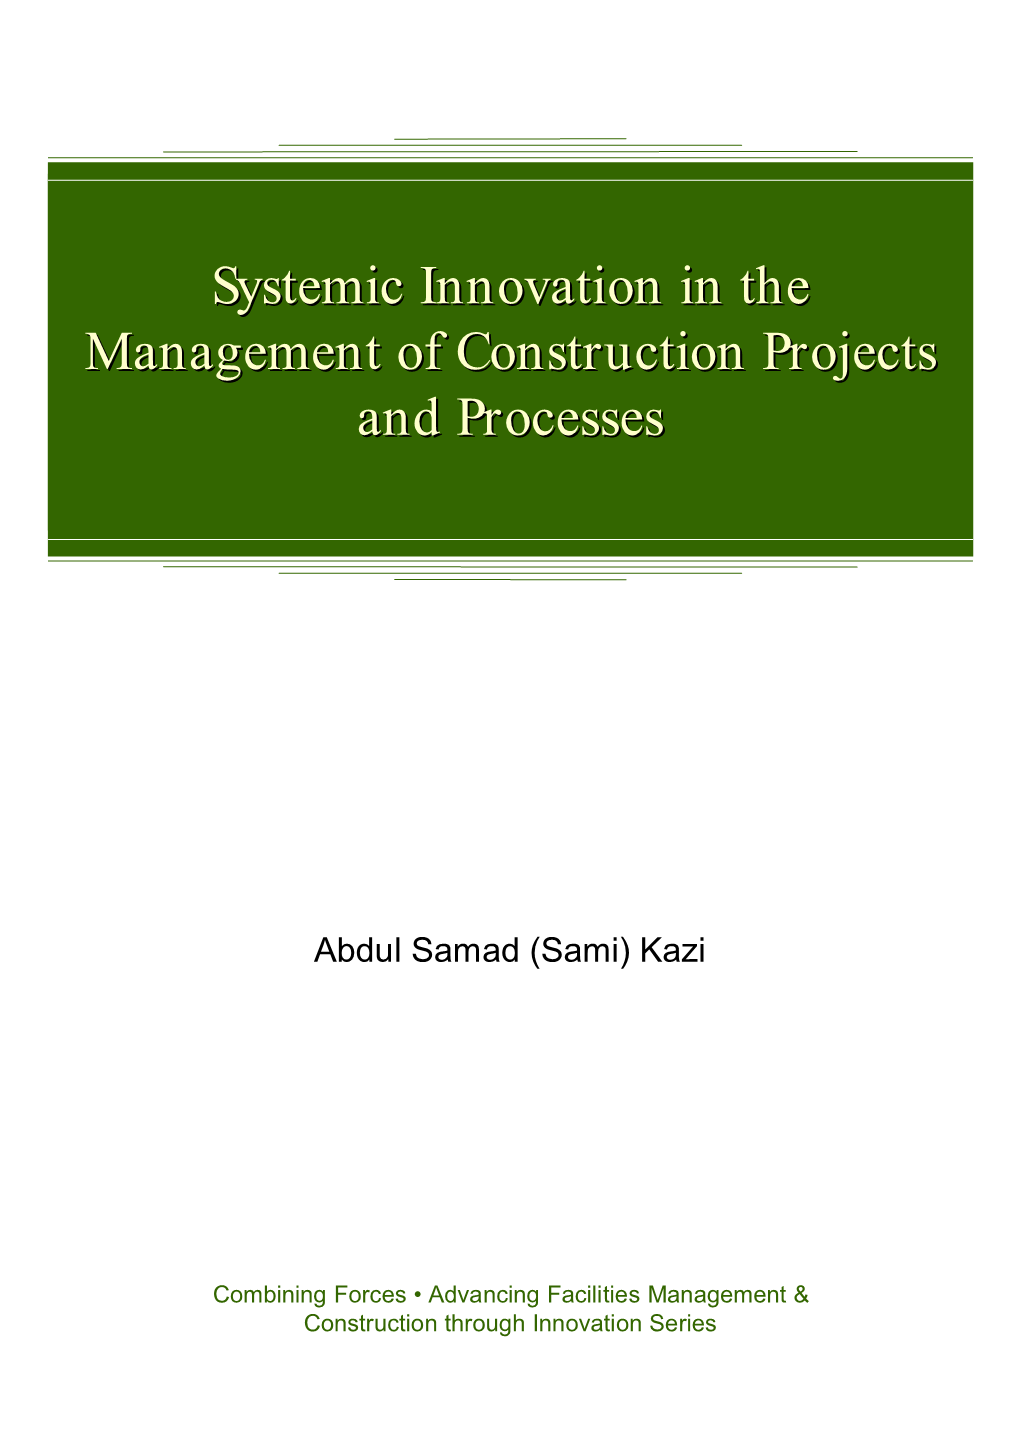 Systemic Innovation in the Management of Construction Projects and Processes